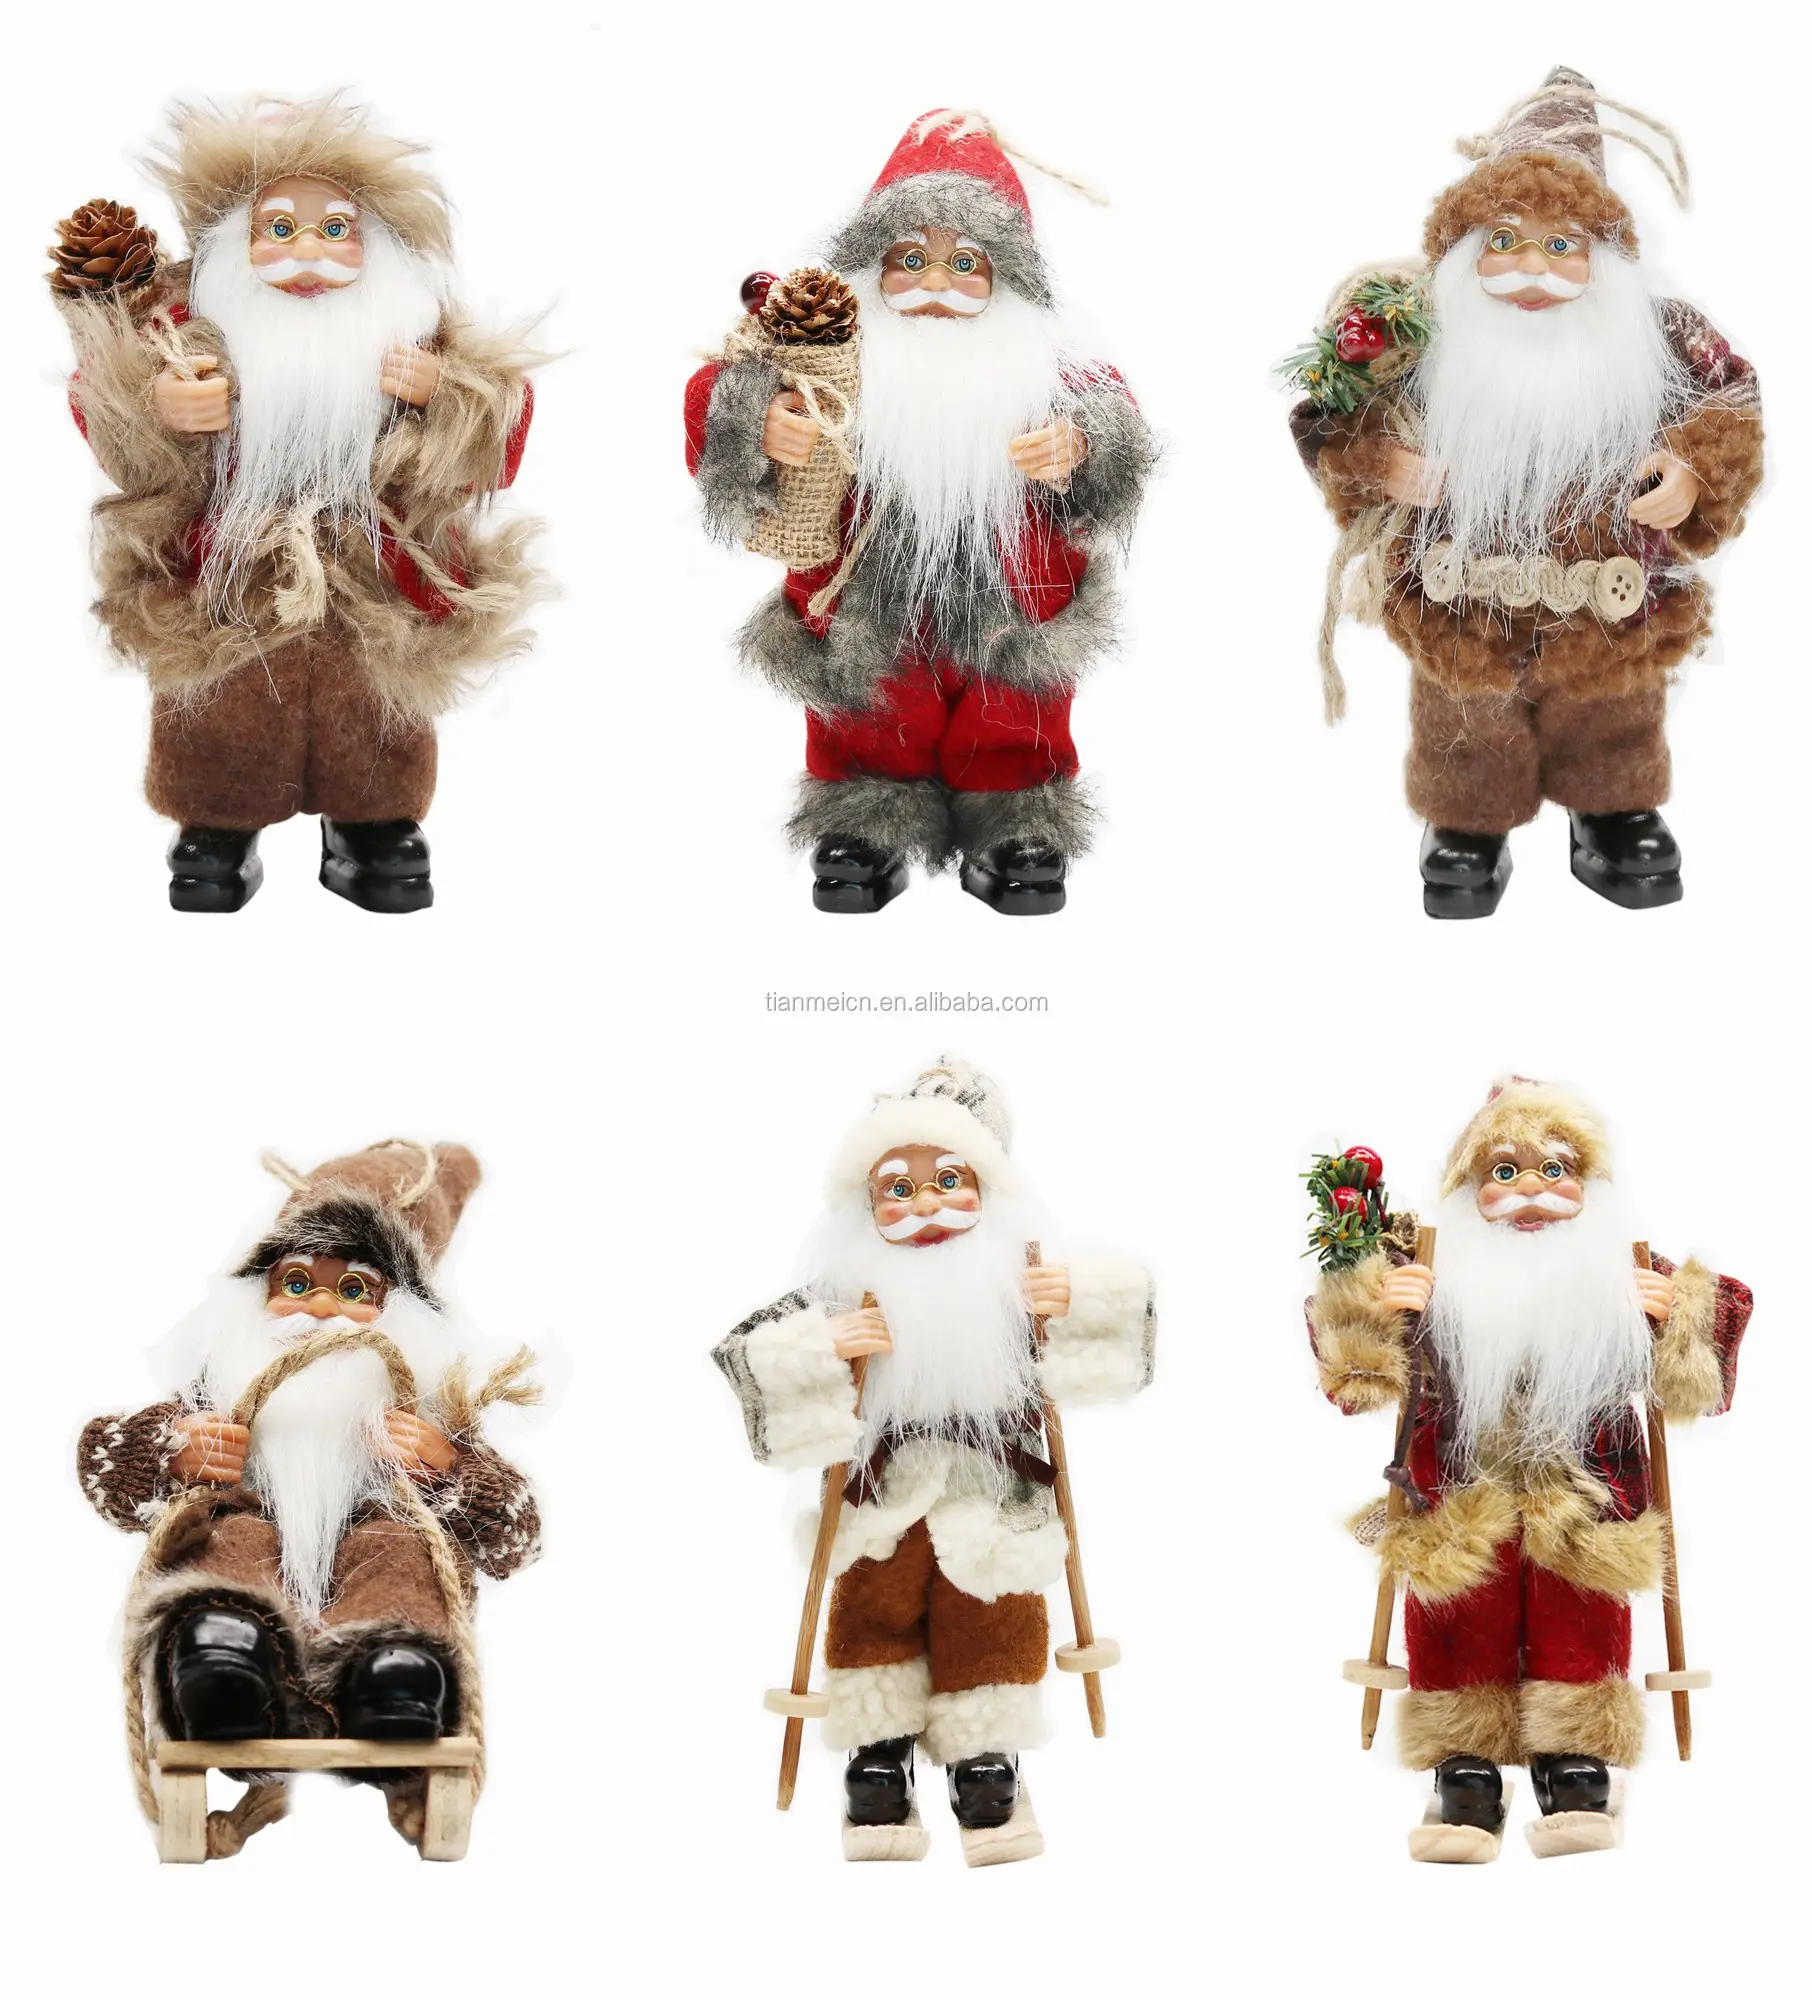 8"Inch Christmas Santa Claus Ornaments Decorations Tree Hanging Figurines Collection Doll Pendant Small Traditional Holding